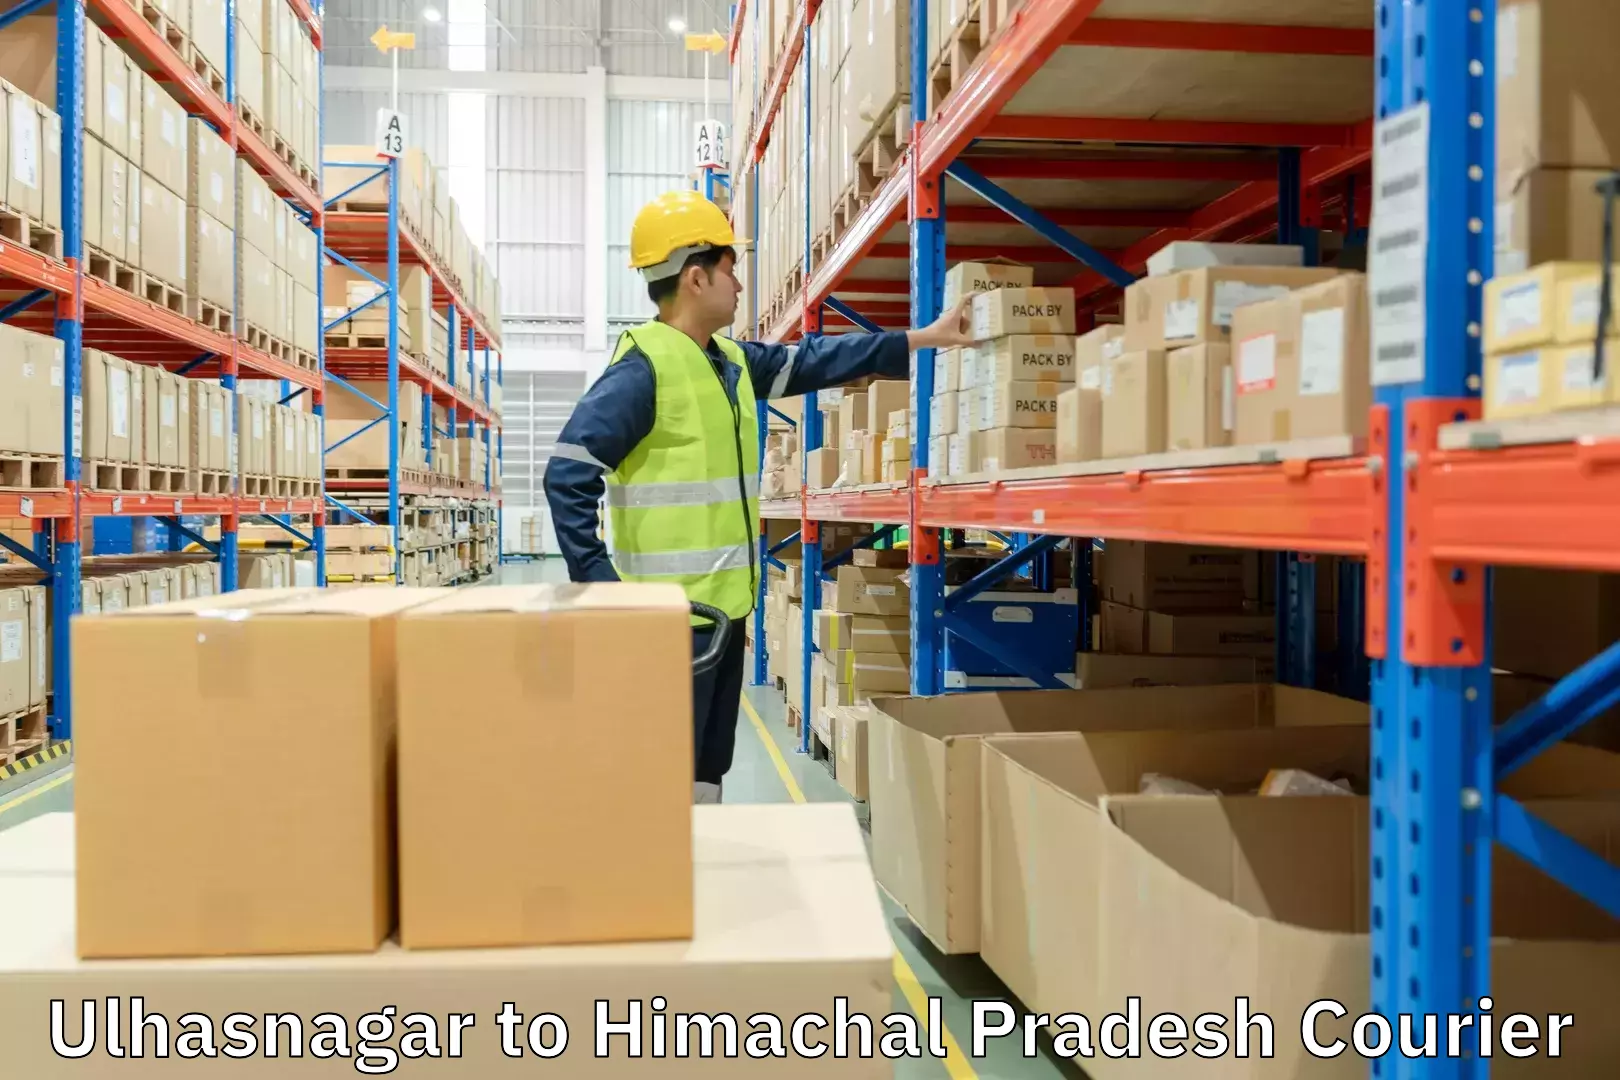 Next-day delivery options Ulhasnagar to Himachal Pradesh